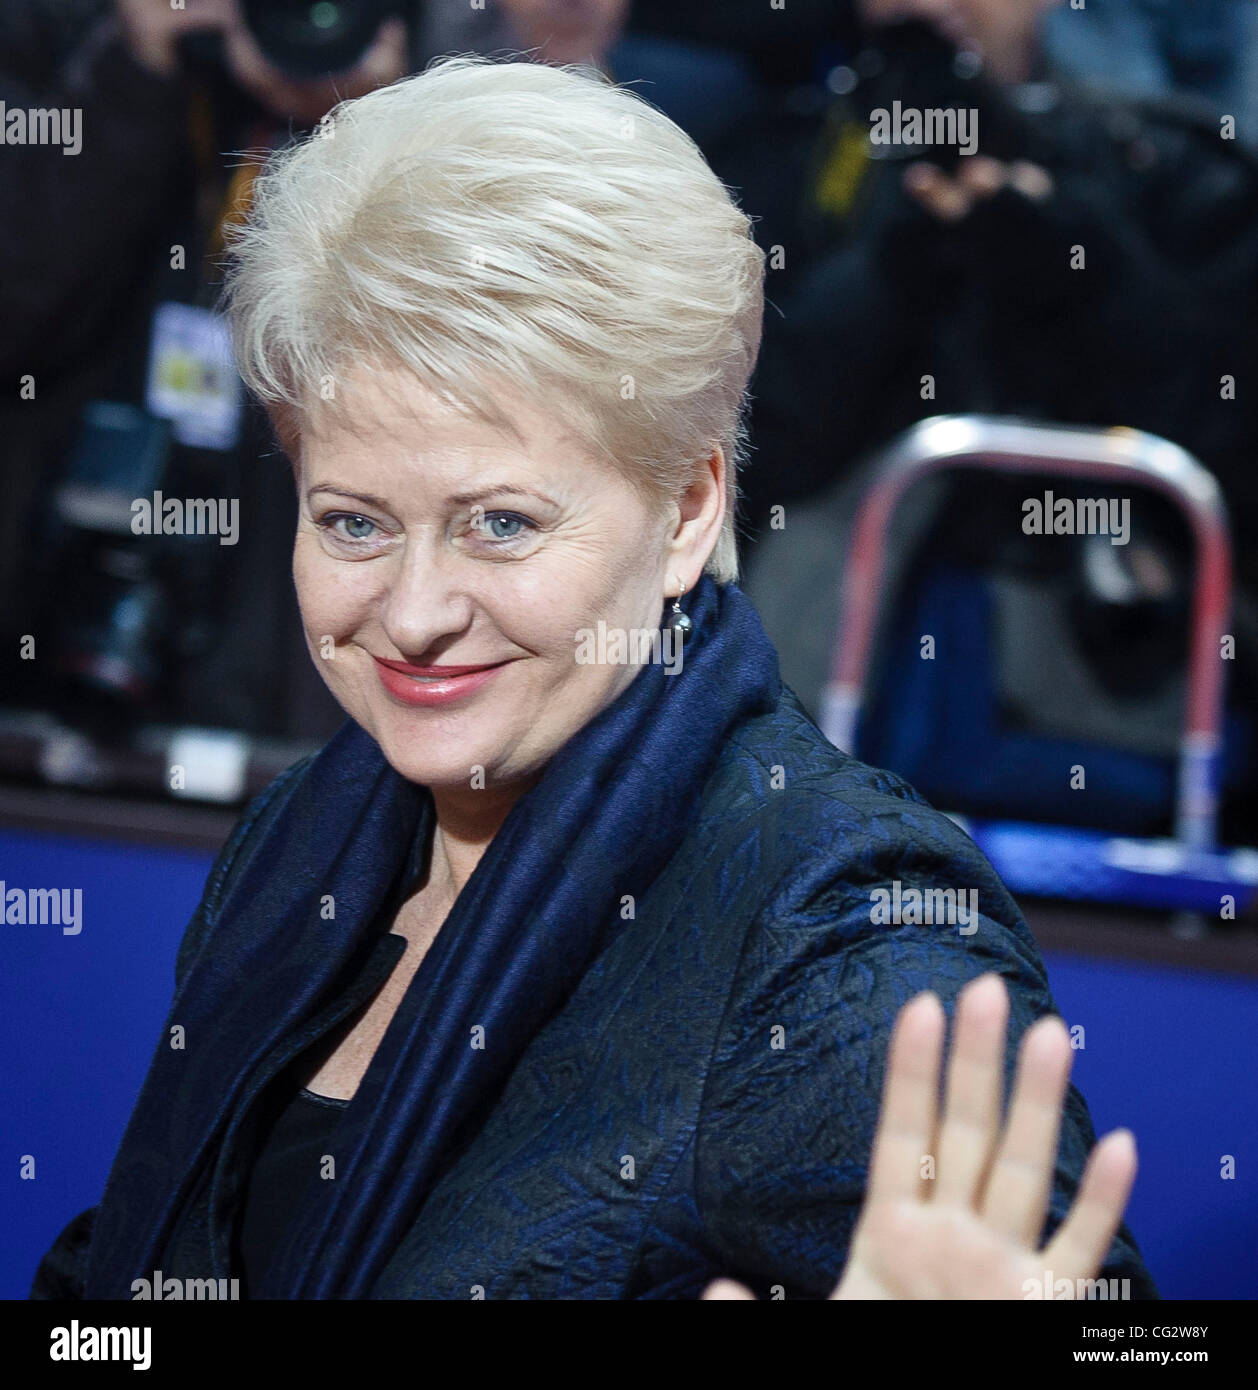 Oct. 26, 2011 - Brussels, BXL, Belgium - Lithuanian President Dalia Grybauskaite  arrives prior to an European Council at the Justus Lipsius building, EU headquarters  in  Brussels, Belgium on 2011-10-26  The European Commission called on eurozone leaders to deliver a 'credible' response to the debt Stock Photo